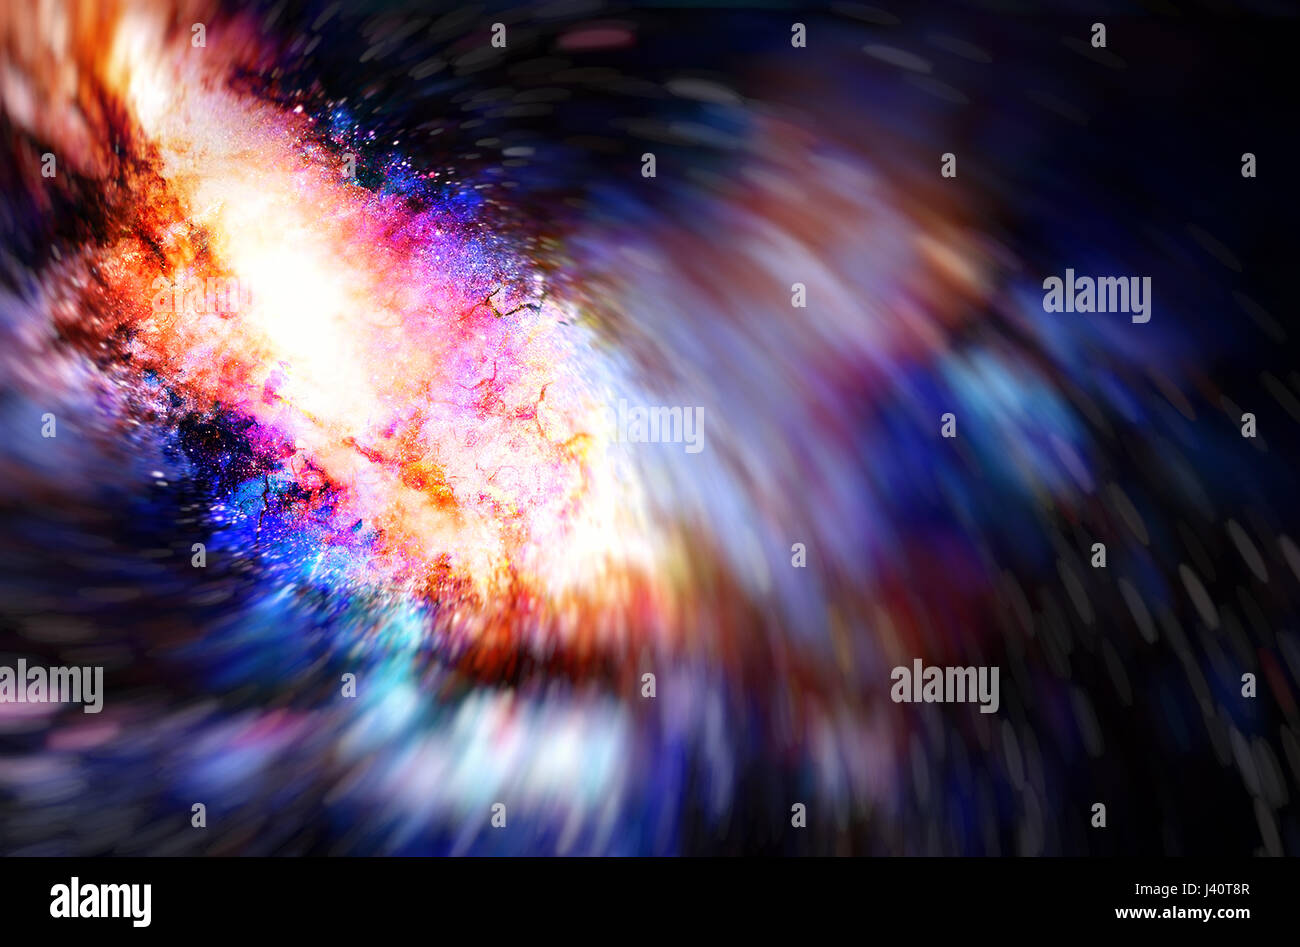 abstract background with cosmic energy swirling effect, colorful dynamic movement Stock Photo